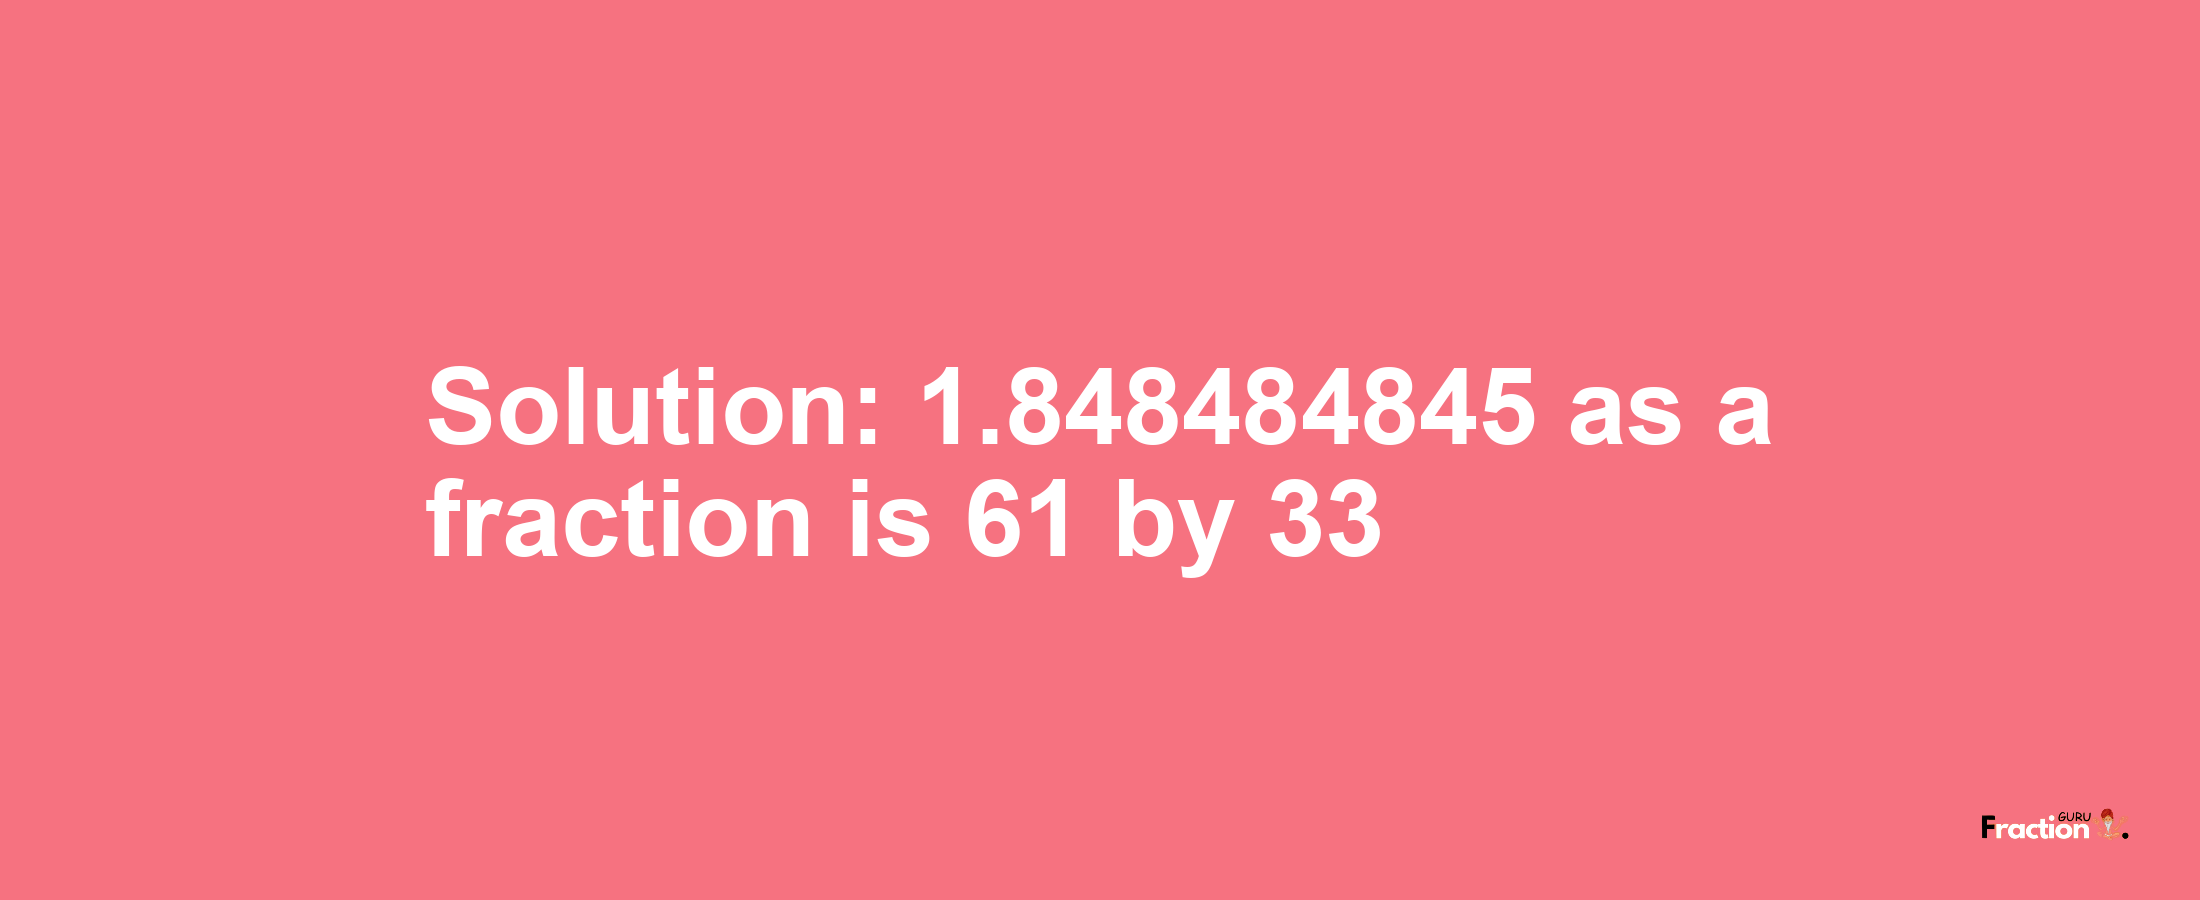 Solution:1.848484845 as a fraction is 61/33